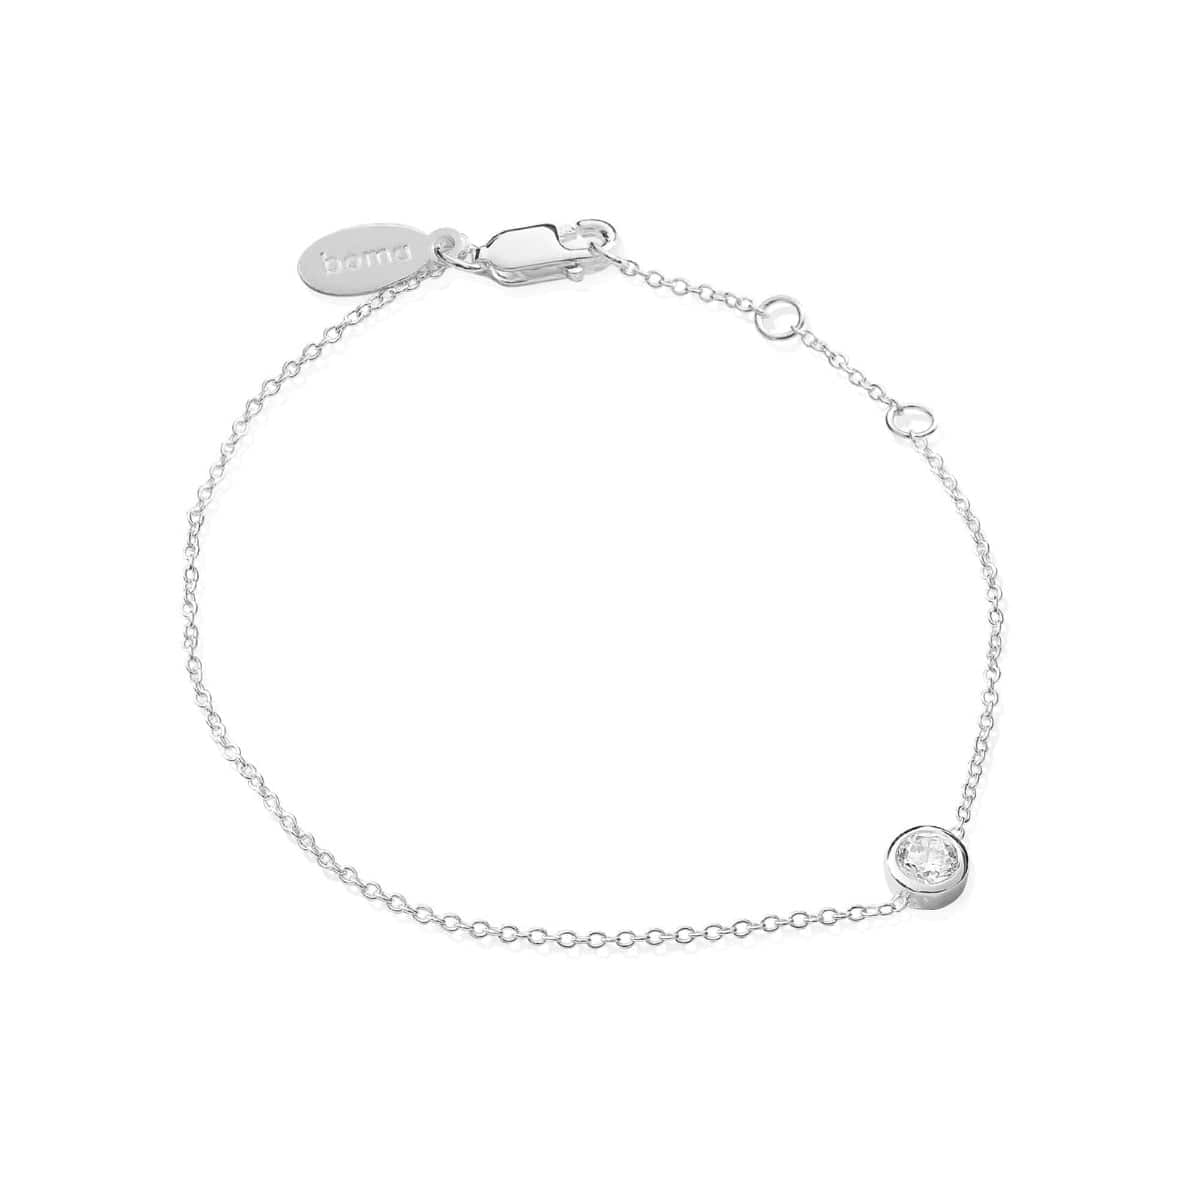 Boma Jewelry Bracelets Sterling Silver with White Topaz Belle Bracelet with Stone